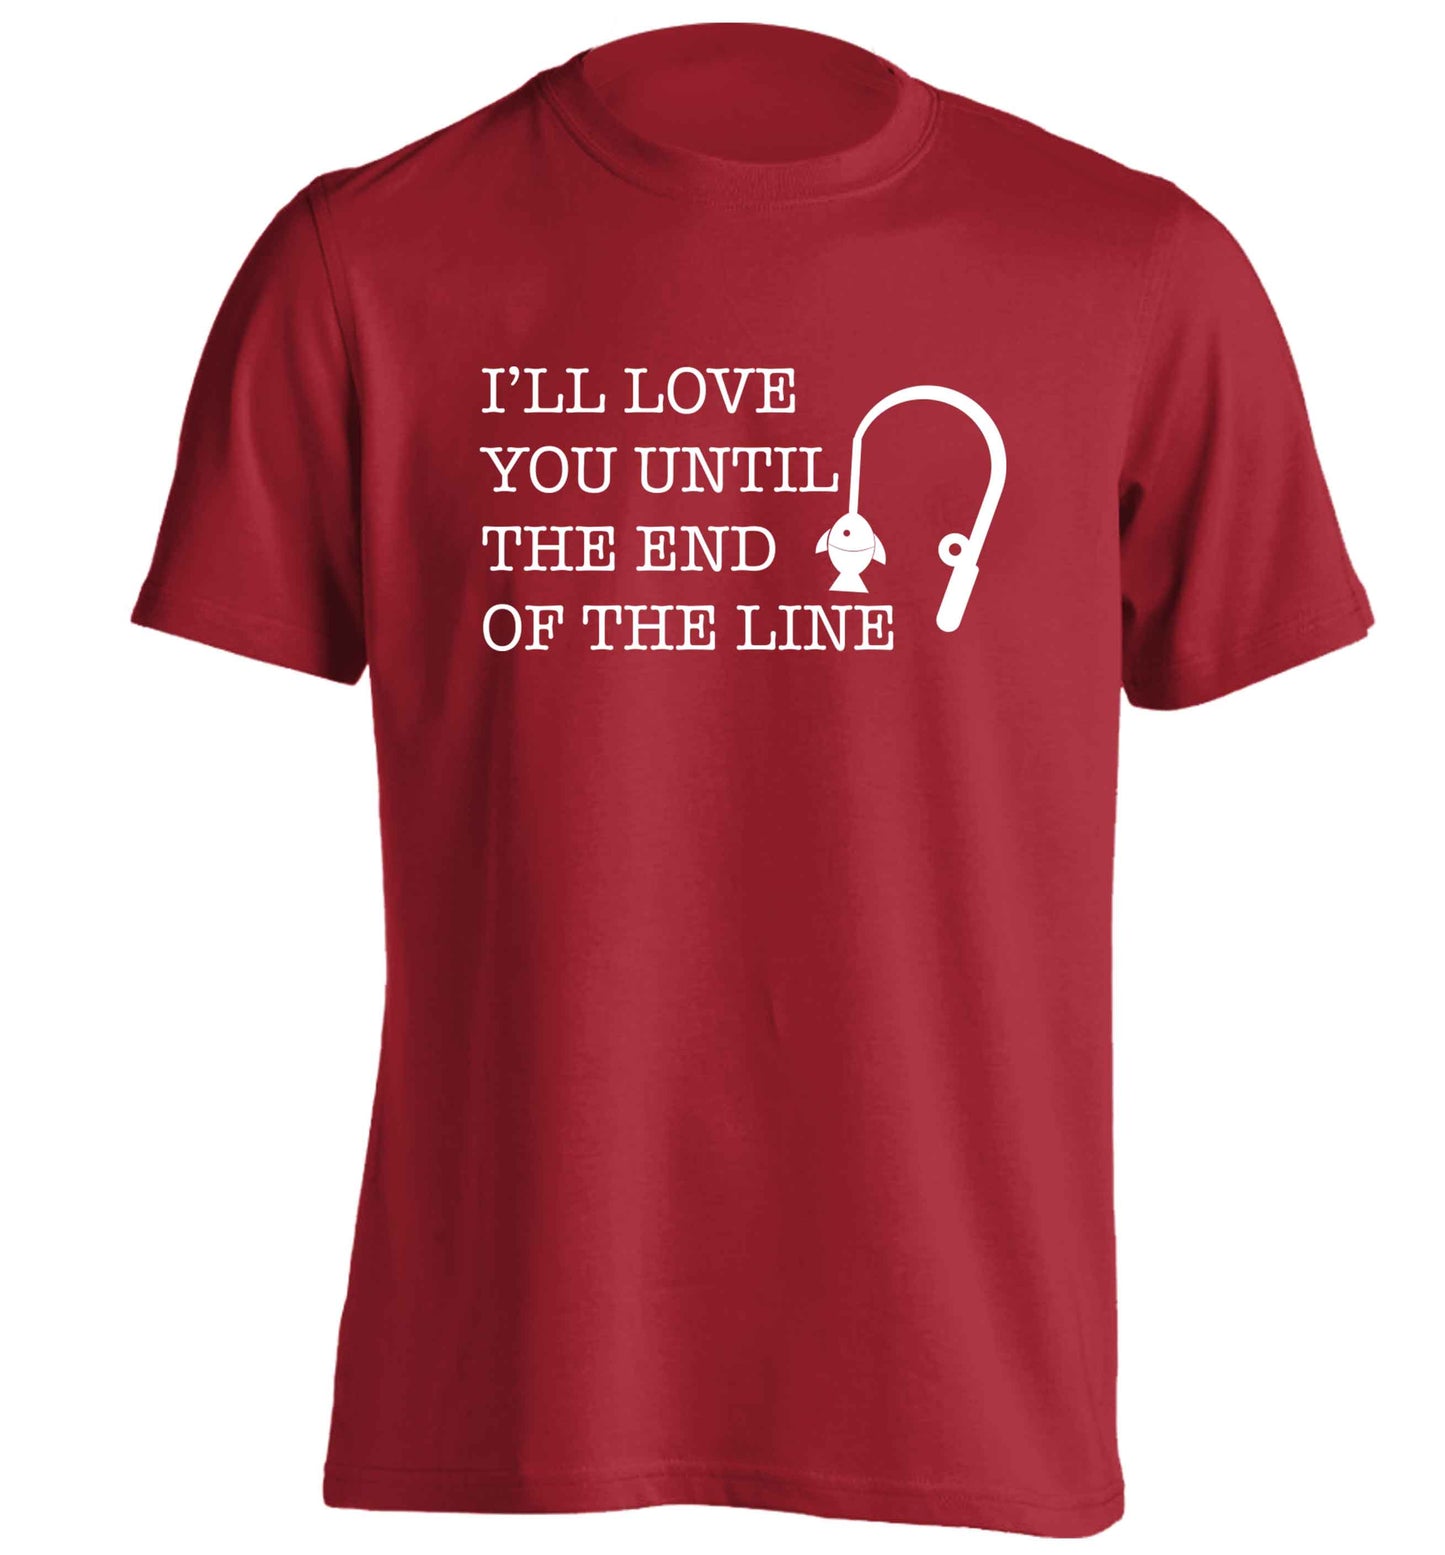 I'll love you until the end of the line adults unisex red Tshirt 2XL